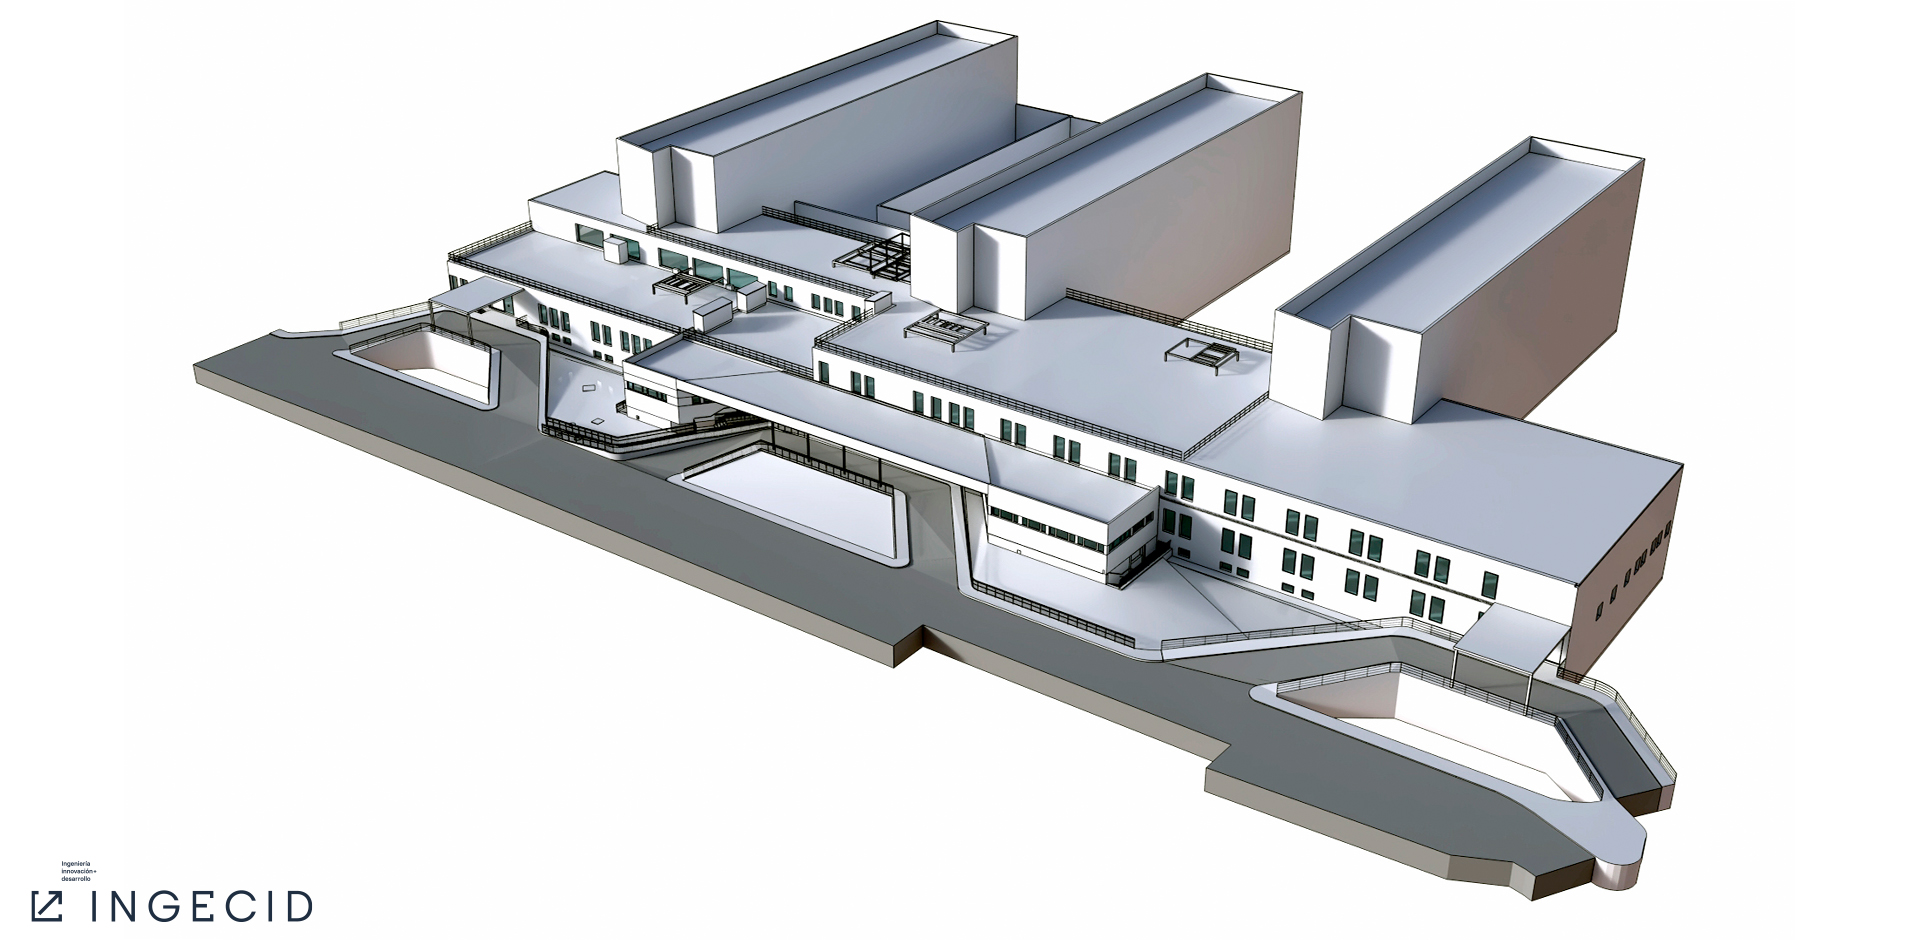 Extension and reform of the emergency department of the Sant Joan D’Alacant University Hospital